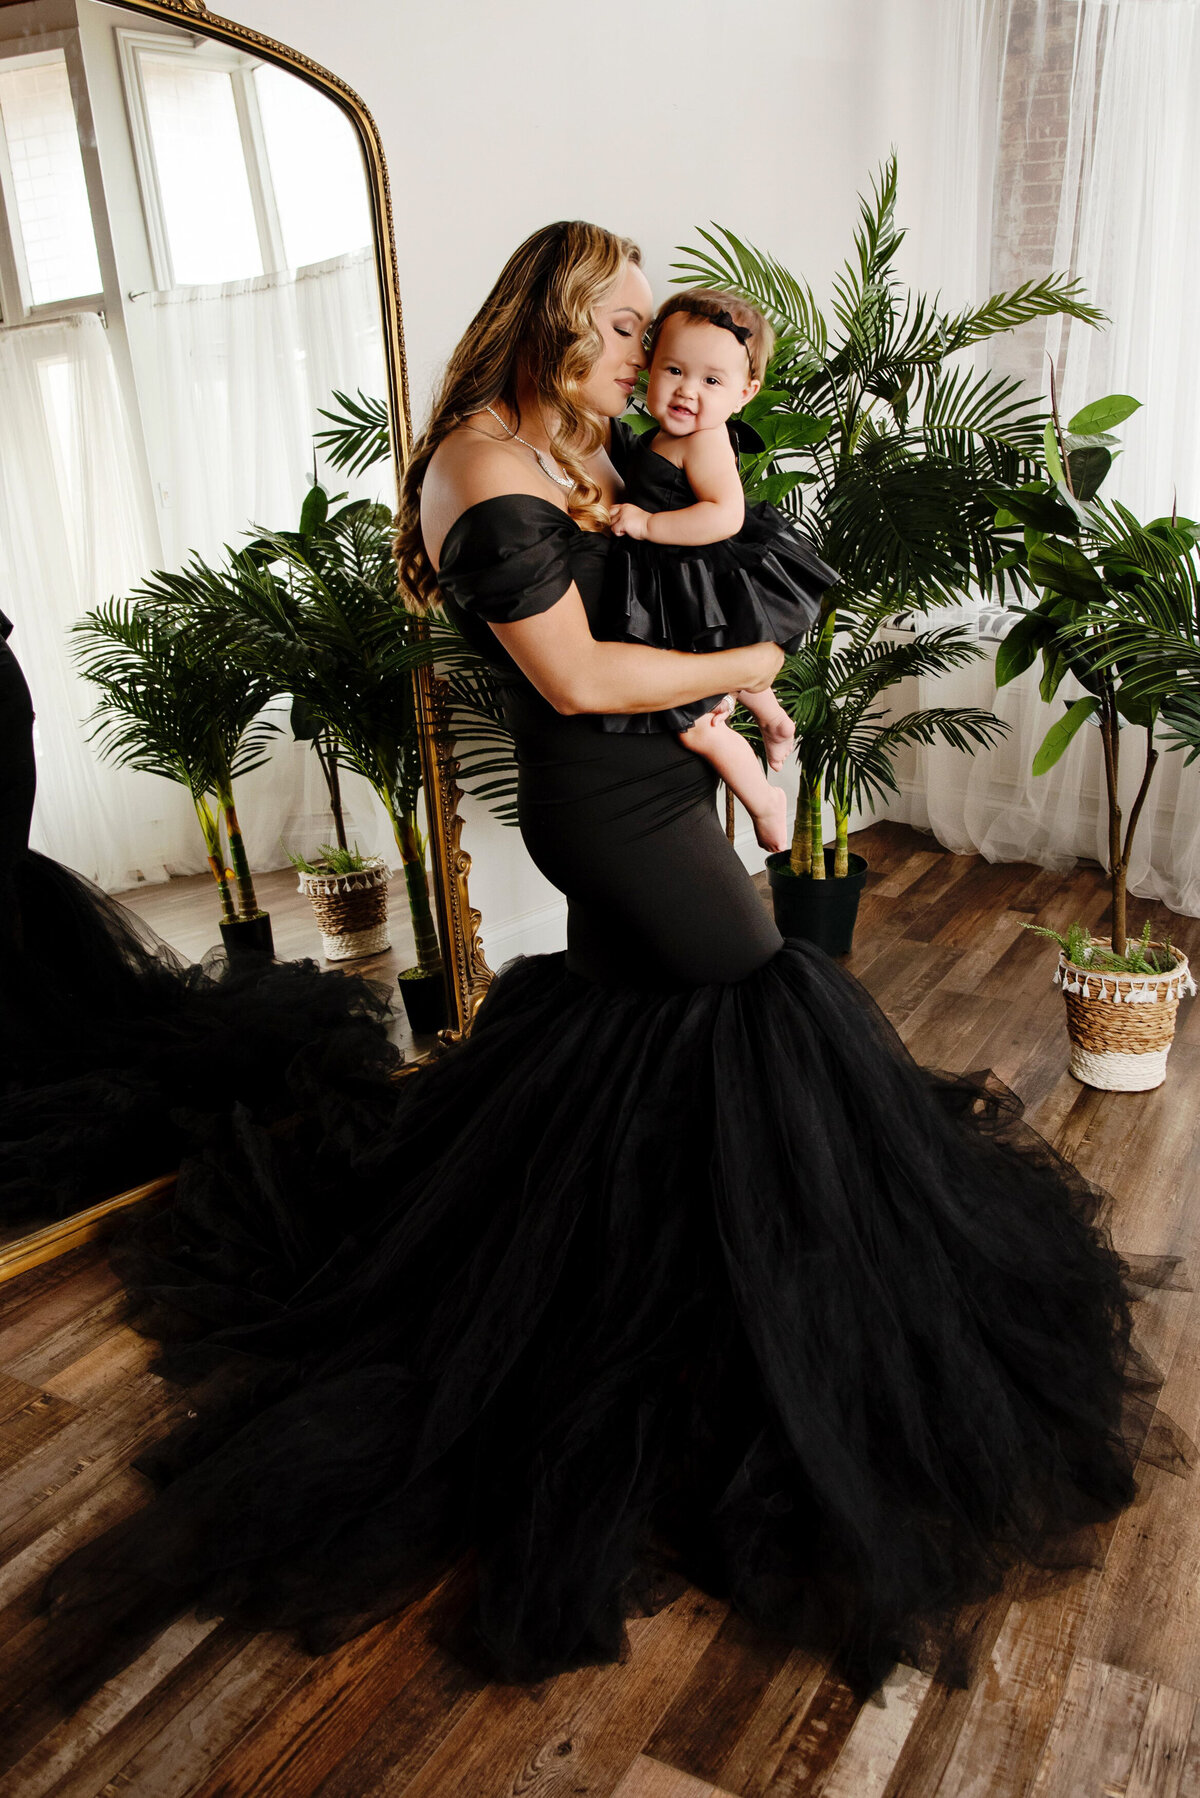 st-louis-family-photographer-mom-in-black-mermaid-gown-with-tulle-bottom-holding-baby-girl-wearing-black-dress-in-front-of-large-mirror-and-plants